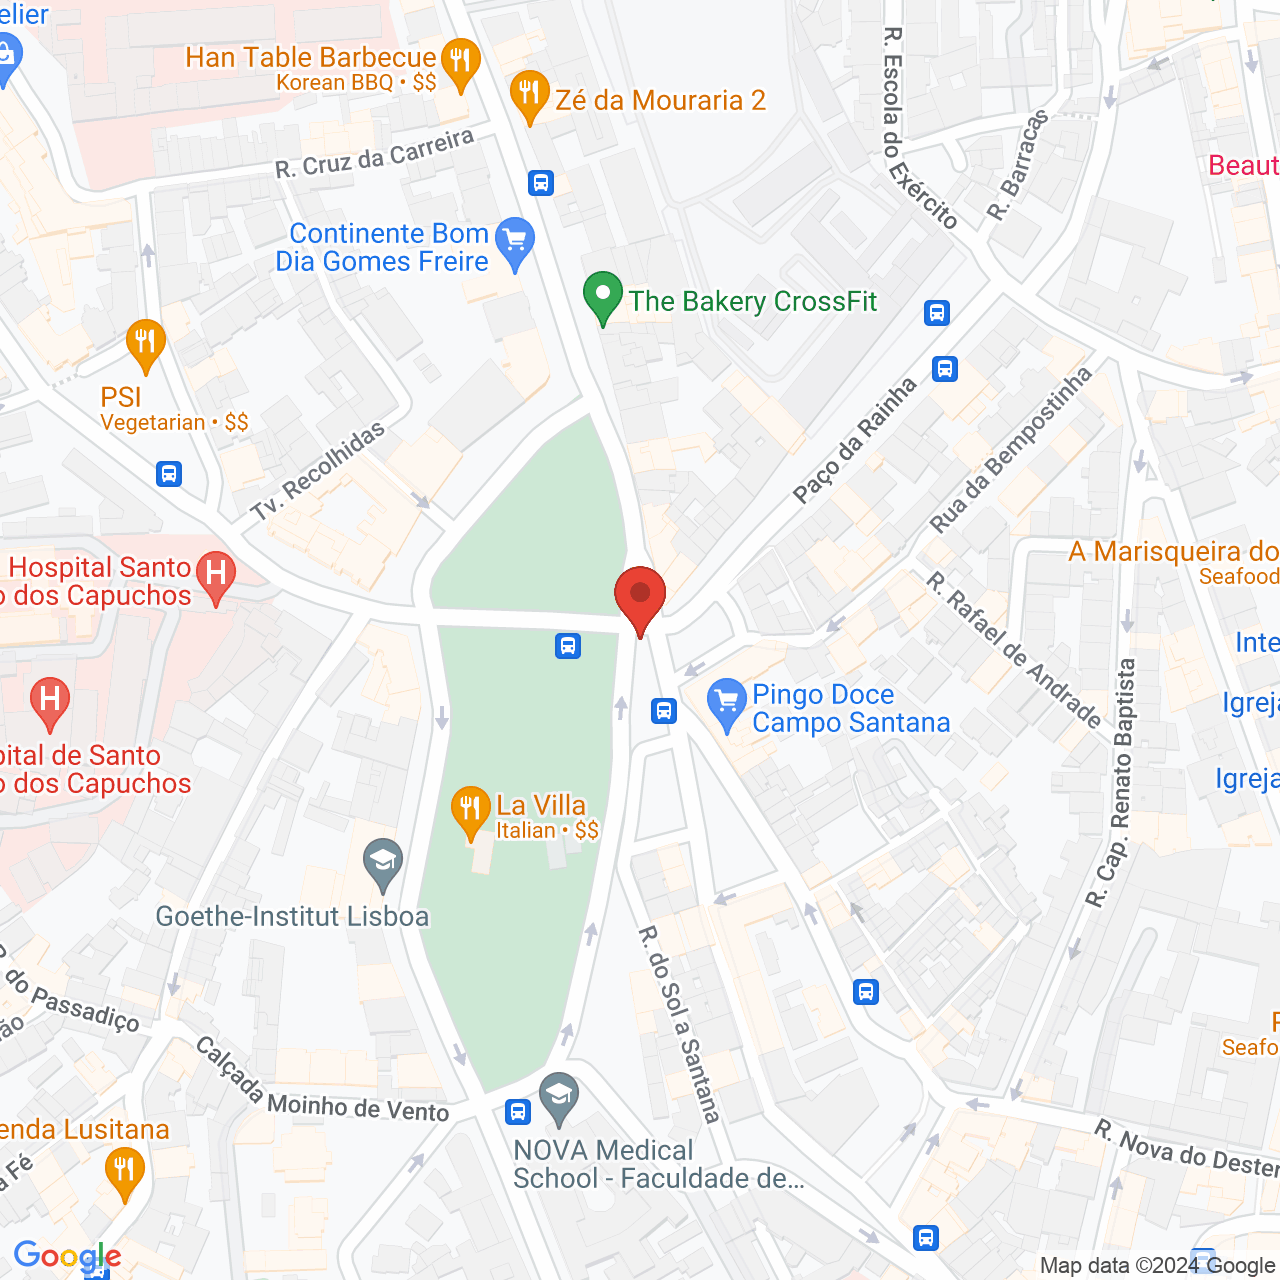 https://maps.googleapis.com/maps/api/staticmap?zoom=10&maptype=hybrid&scale=4&center=38.7222524,-9.1393366&markers=color:red%7C%7C38.7222524,-9.1393366&size=1000x1000&key=AIzaSyAQg6Liu52-a7wn17F9B-5c4QmJ9kTO3Mo